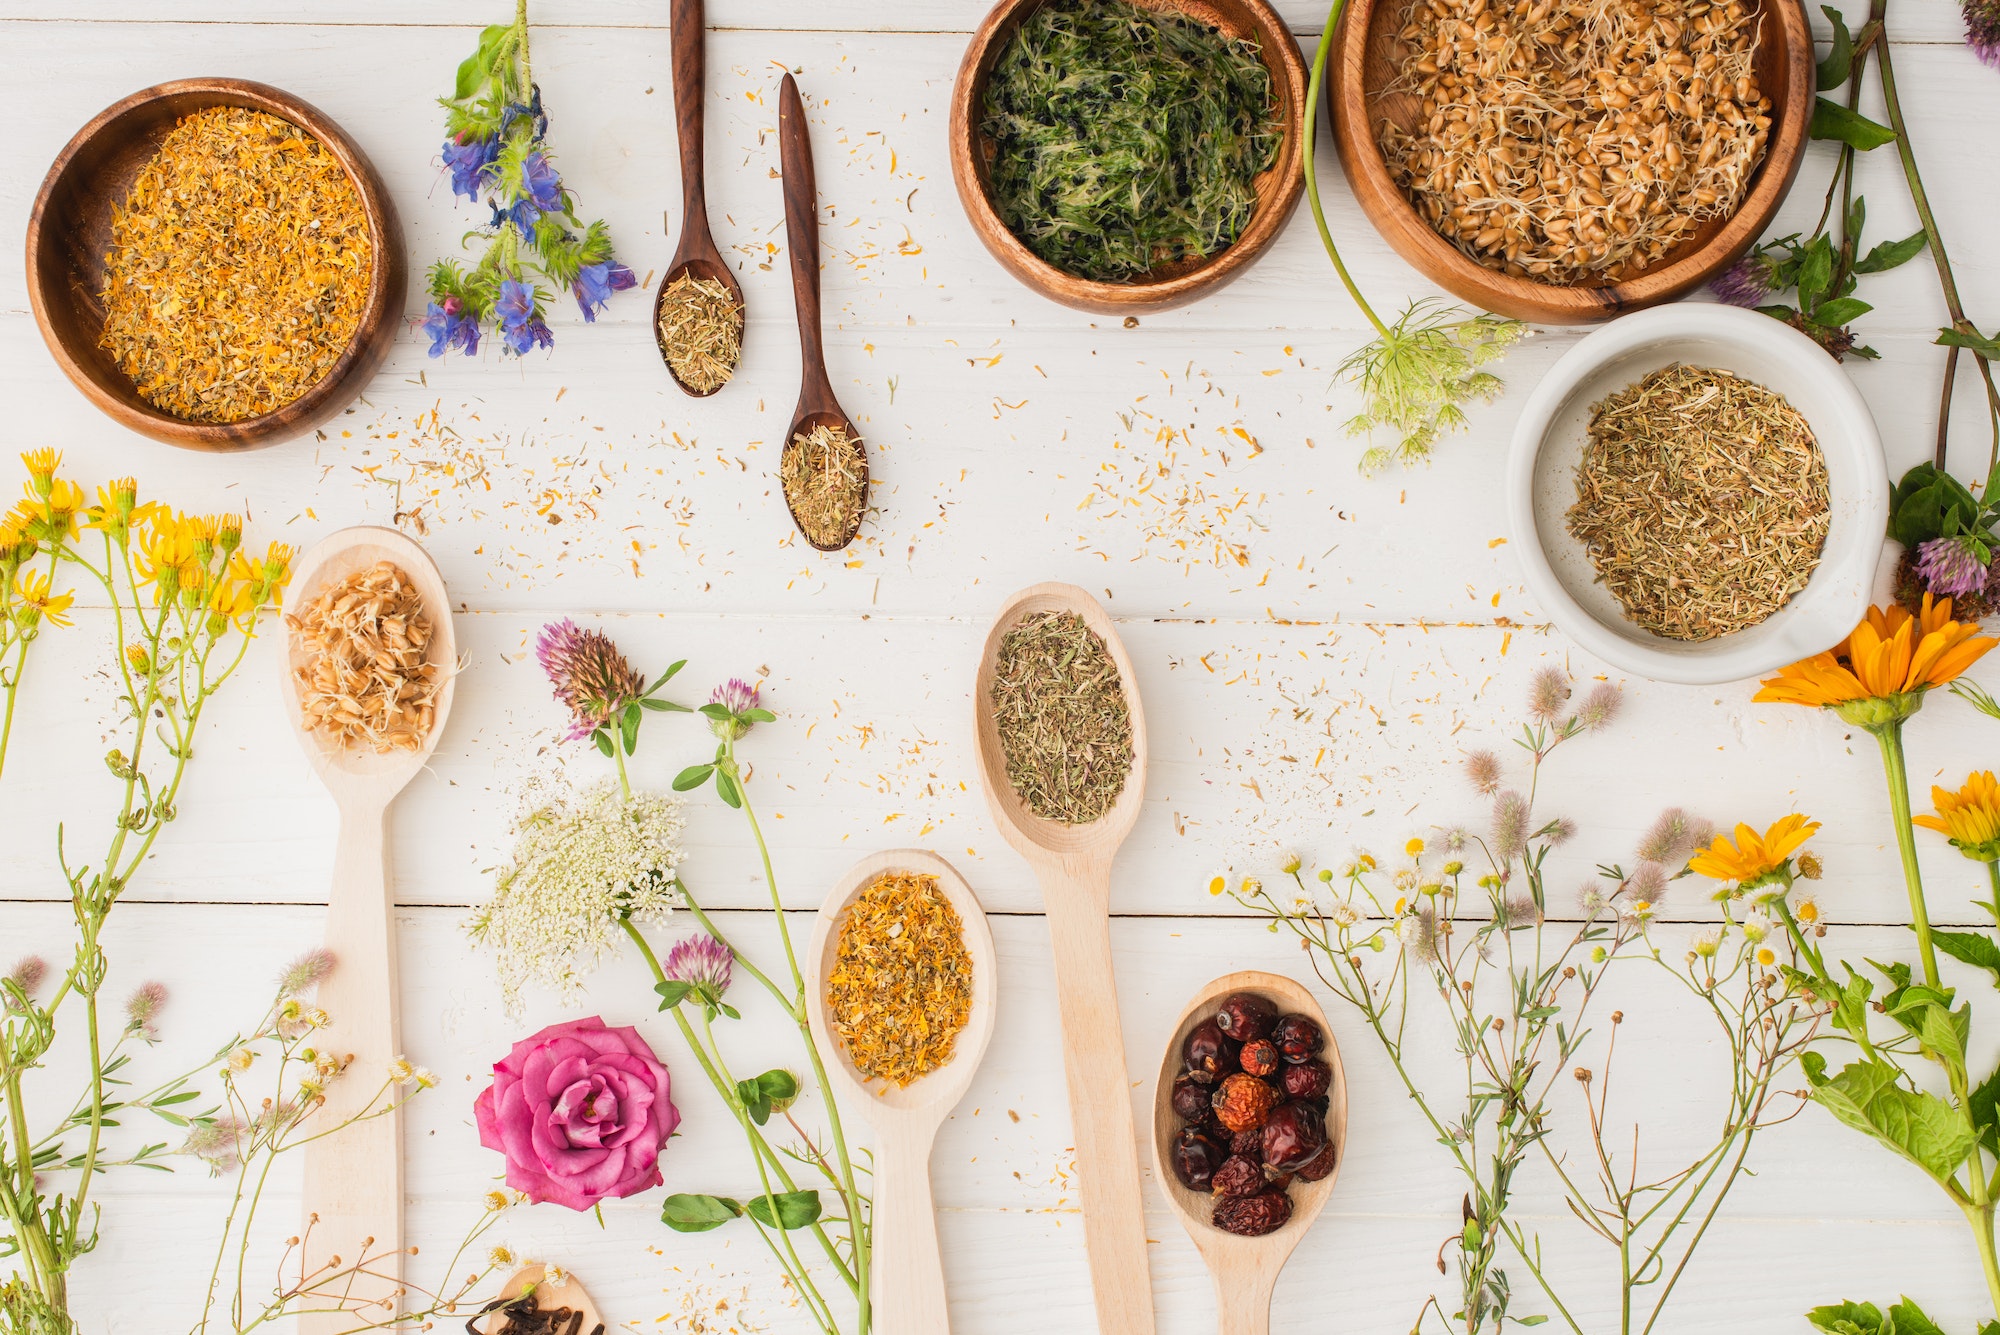 Introduction to Naturopathy